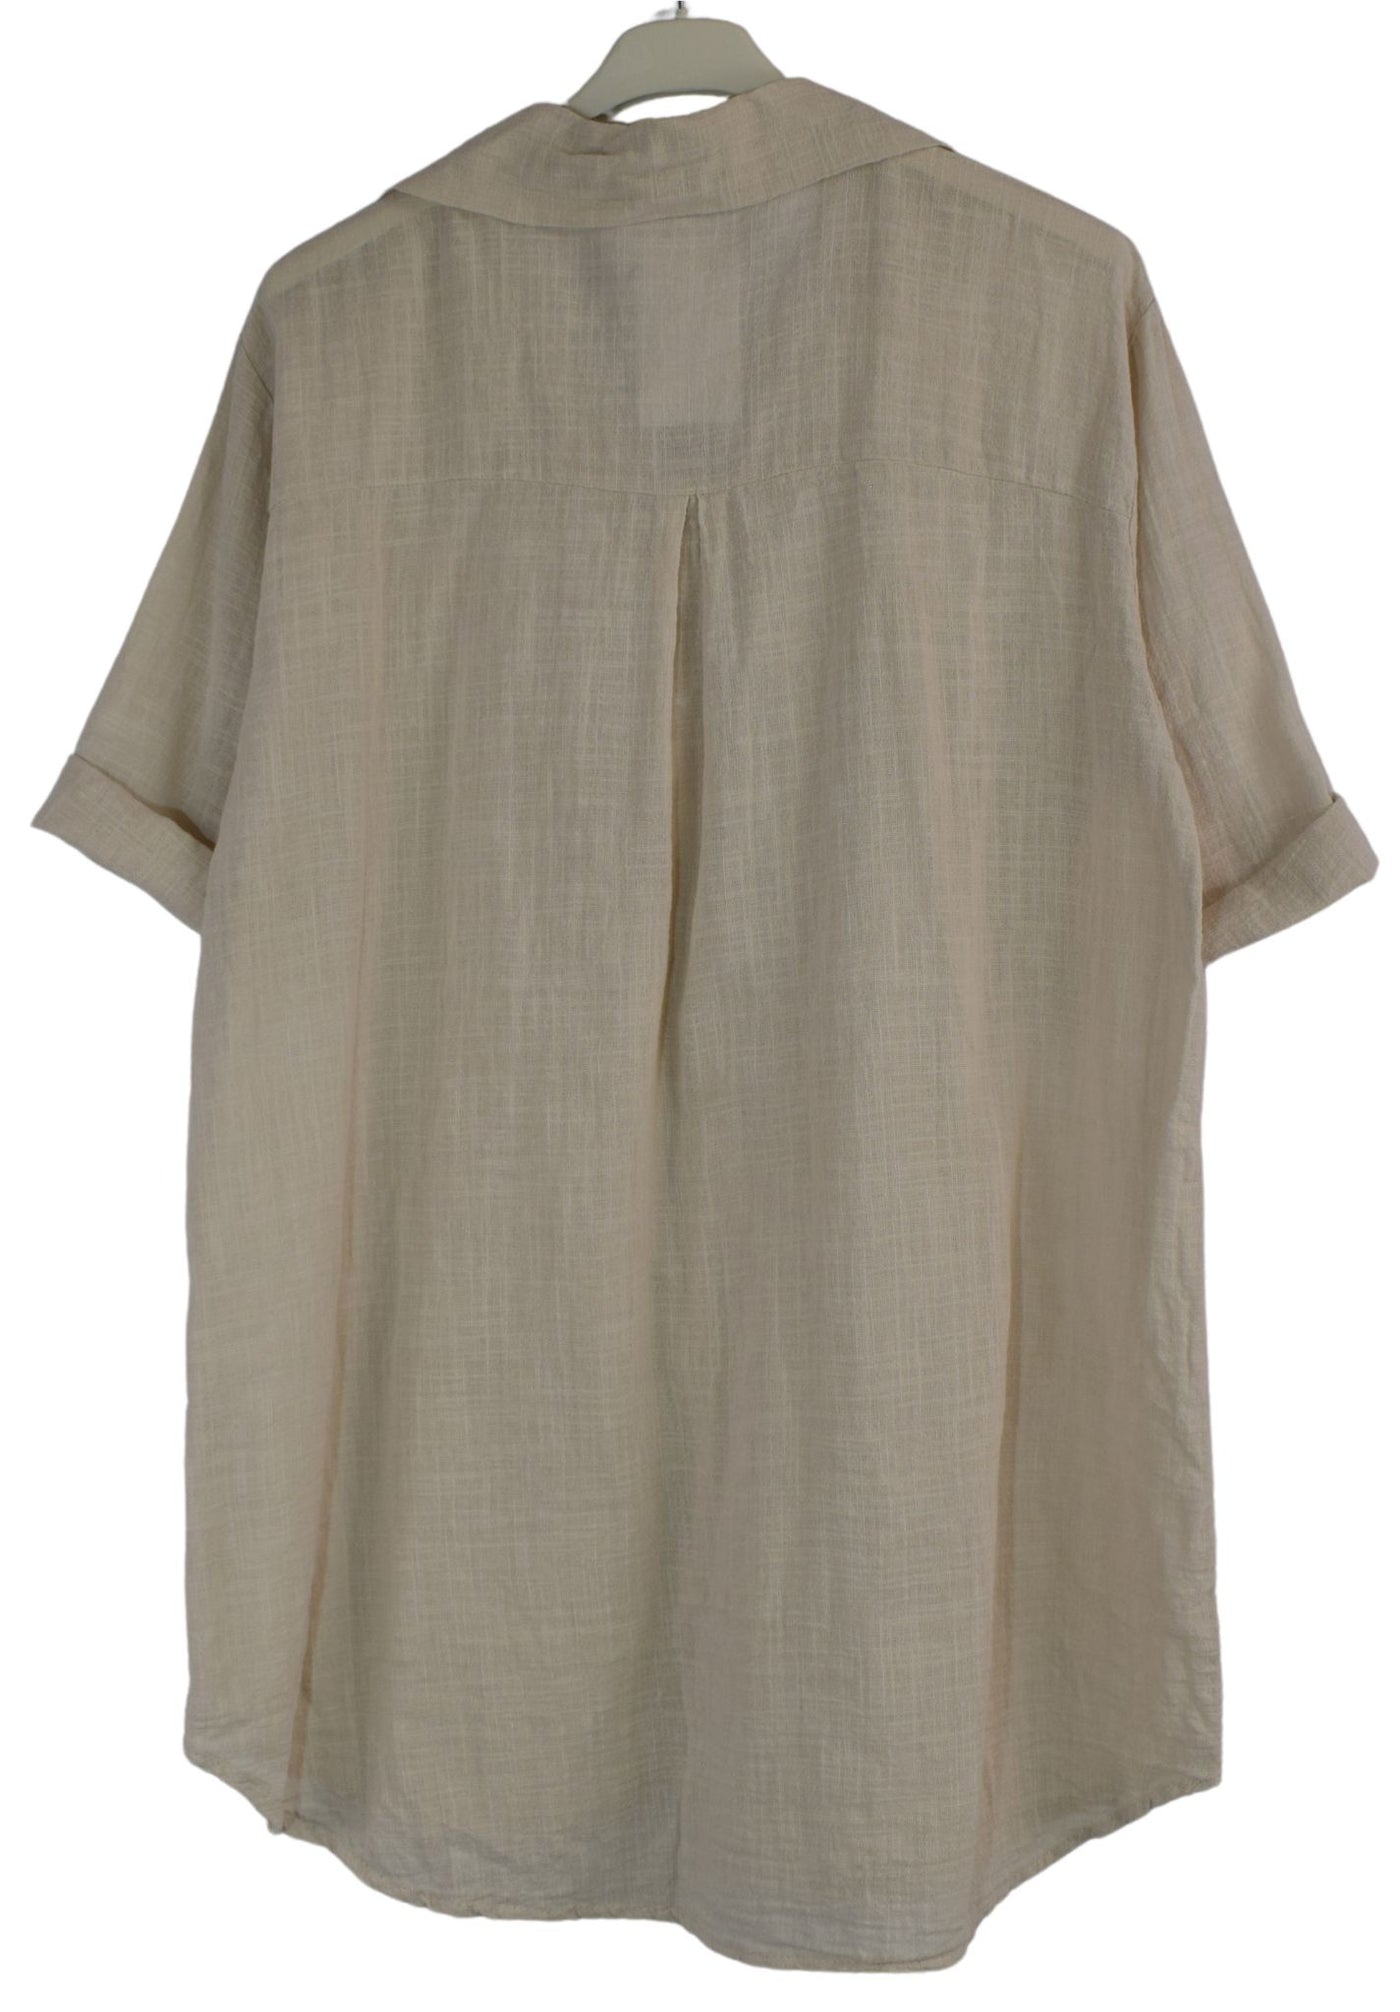 Cotton Collared Tunic Top for Summer with Button Detailing Lightweight Casual Top